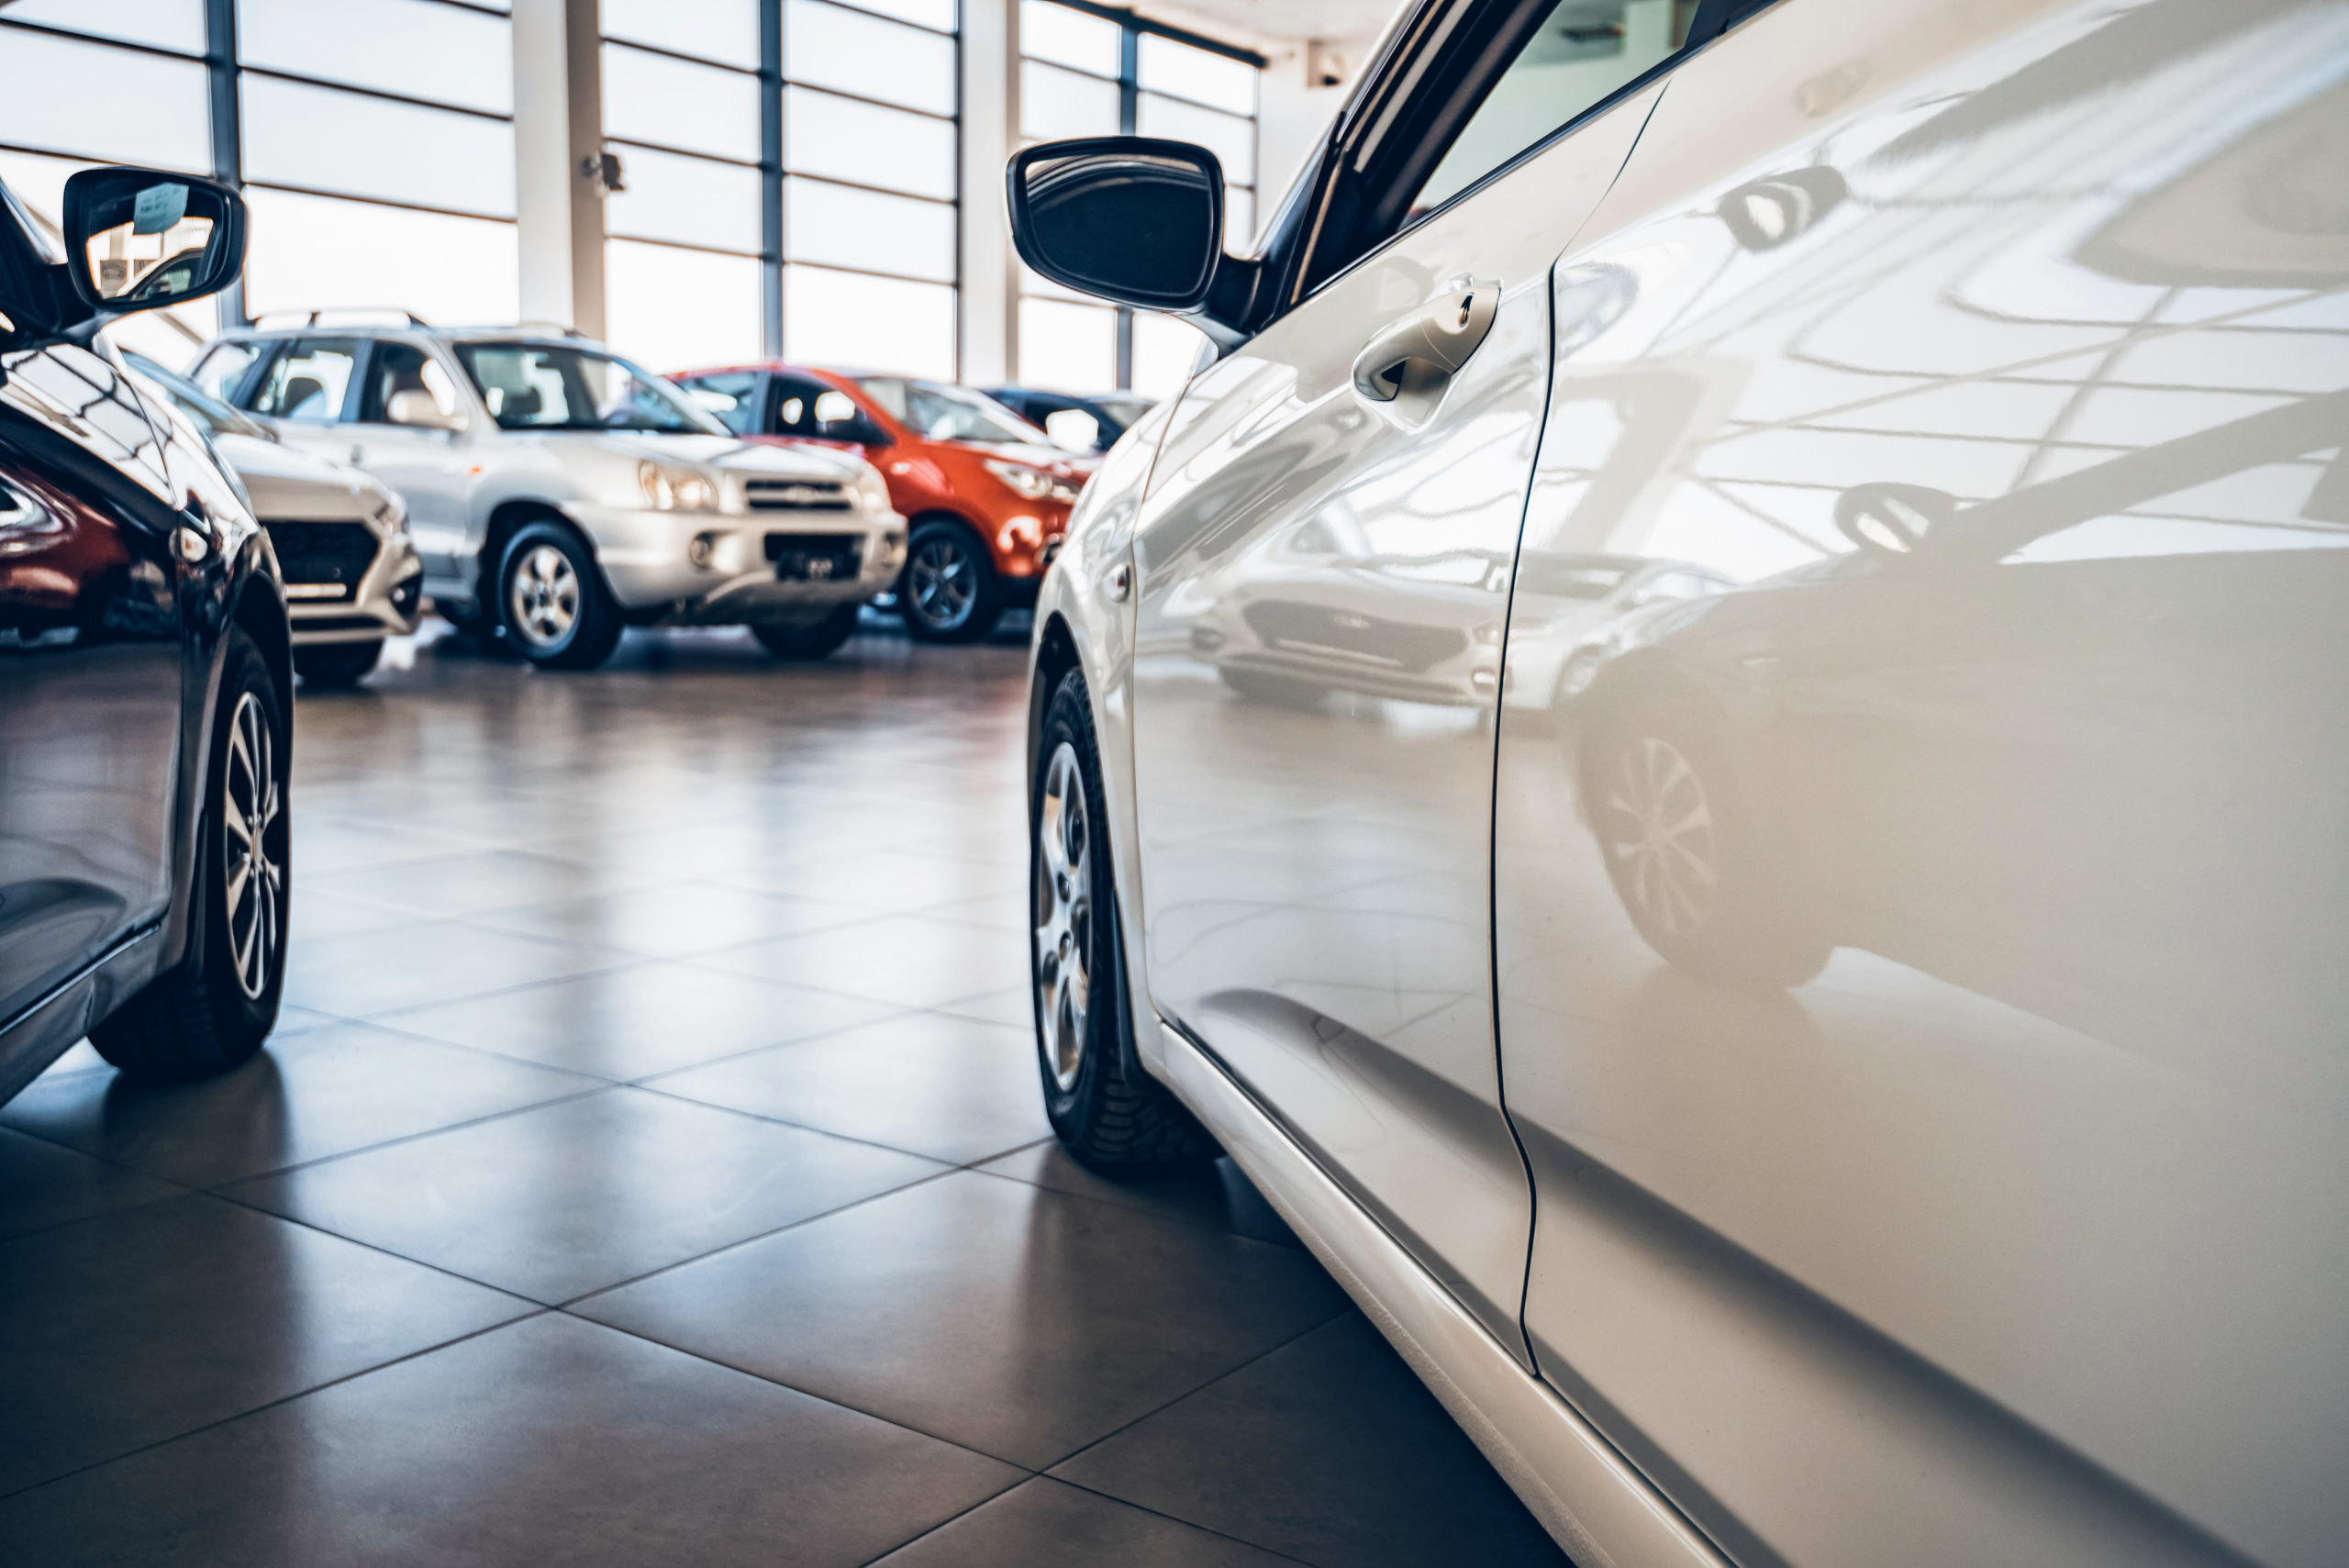 Movers and shakers: The used car sales trends to watch in 2021